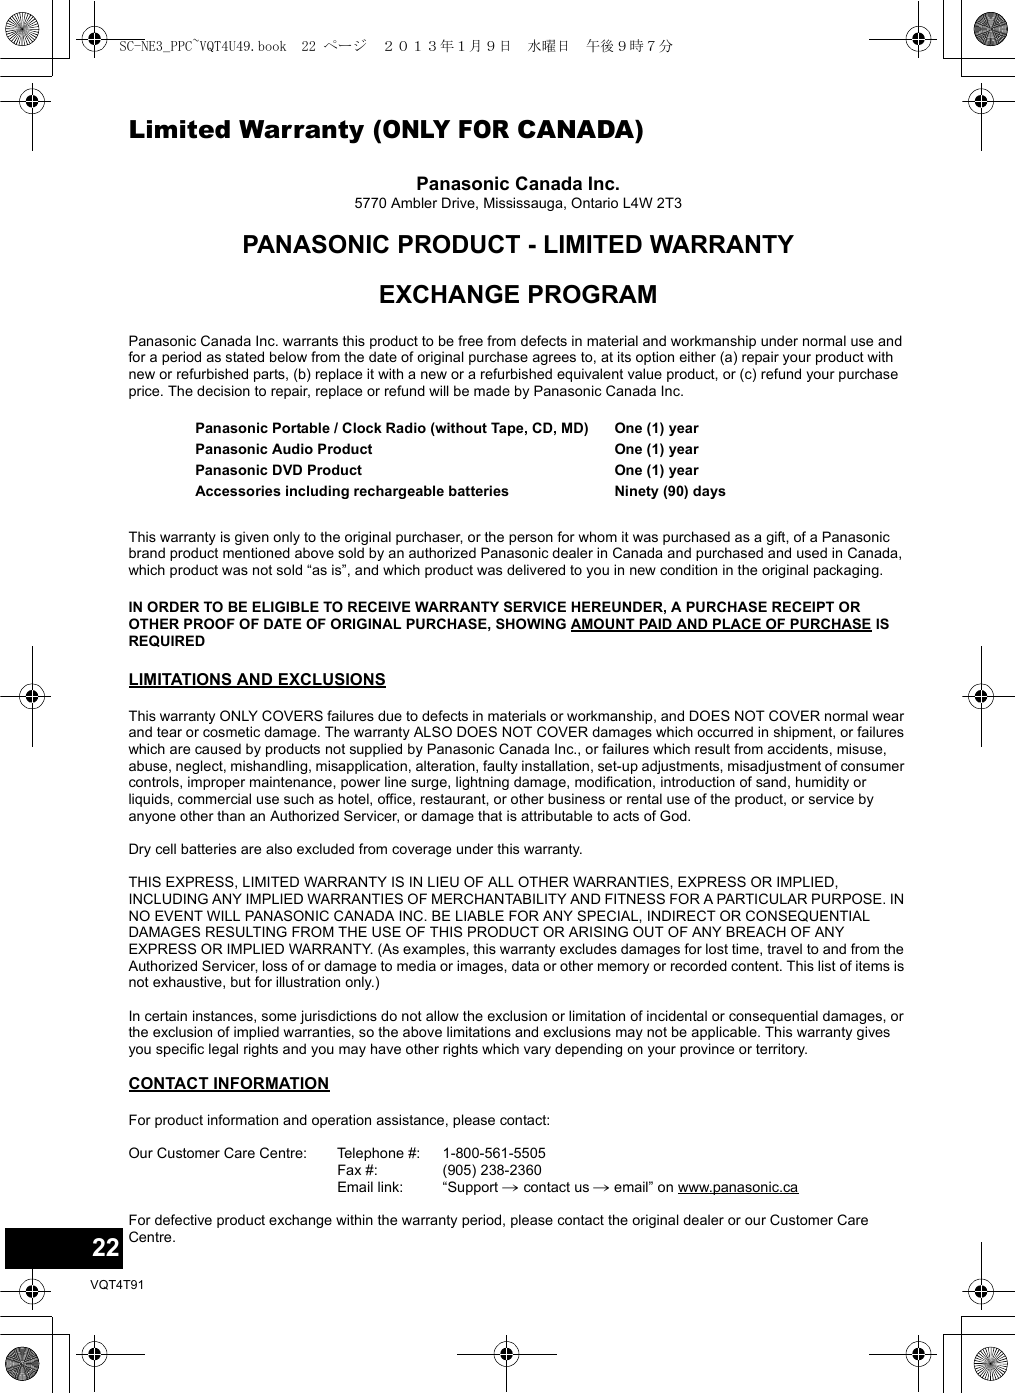 22VQT4T91Limited Warranty (ONLY FOR CANADA)Panasonic Canada Inc.5770 Ambler Drive, Mississauga, Ontario L4W 2T3PANASONIC PRODUCT - LIMITED WARRANTYEXCHANGE PROGRAMPanasonic Canada Inc. warrants this product to be free from defects in material and workmanship under normal use and for a period as stated below from the date of original purchase agrees to, at its option either (a) repair your product with new or refurbished parts, (b) replace it with a new or a refurbished equivalent value product, or (c) refund your purchase price. The decision to repair, replace or refund will be made by Panasonic Canada Inc.This warranty is given only to the original purchaser, or the person for whom it was purchased as a gift, of a Panasonic brand product mentioned above sold by an authorized Panasonic dealer in Canada and purchased and used in Canada, which product was not sold “as is”, and which product was delivered to you in new condition in the original packaging.IN ORDER TO BE ELIGIBLE TO RECEIVE WARRANTY SERVICE HEREUNDER, A PURCHASE RECEIPT OR OTHER PROOF OF DATE OF ORIGINAL PURCHASE, SHOWING AMOUNT PAID AND PLACE OF PURCHASE IS REQUIRED LIMITATIONS AND EXCLUSIONSThis warranty ONLY COVERS failures due to defects in materials or workmanship, and DOES NOT COVER normal wear and tear or cosmetic damage. The warranty ALSO DOES NOT COVER damages which occurred in shipment, or failures which are caused by products not supplied by Panasonic Canada Inc., or failures which result from accidents, misuse, abuse, neglect, mishandling, misapplication, alteration, faulty installation, set-up adjustments, misadjustment of consumer controls, improper maintenance, power line surge, lightning damage, modification, introduction of sand, humidity or liquids, commercial use such as hotel, office, restaurant, or other business or rental use of the product, or service by anyone other than an Authorized Servicer, or damage that is attributable to acts of God.Dry cell batteries are also excluded from coverage under this warranty.THIS EXPRESS, LIMITED WARRANTY IS IN LIEU OF ALL OTHER WARRANTIES, EXPRESS OR IMPLIED, INCLUDING ANY IMPLIED WARRANTIES OF MERCHANTABILITY AND FITNESS FOR A PARTICULAR PURPOSE. IN NO EVENT WILL PANASONIC CANADA INC. BE LIABLE FOR ANY SPECIAL, INDIRECT OR CONSEQUENTIAL DAMAGES RESULTING FROM THE USE OF THIS PRODUCT OR ARISING OUT OF ANY BREACH OF ANY EXPRESS OR IMPLIED WARRANTY. (As examples, this warranty excludes damages for lost time, travel to and from the Authorized Servicer, loss of or damage to media or images, data or other memory or recorded content. This list of items is not exhaustive, but for illustration only.)In certain instances, some jurisdictions do not allow the exclusion or limitation of incidental or consequential damages, or the exclusion of implied warranties, so the above limitations and exclusions may not be applicable. This warranty gives you specific legal rights and you may have other rights which vary depending on your province or territory.CONTACT INFORMATIONPanasonic Portable / Clock Radio (without Tape, CD, MD)Panasonic Audio ProductPanasonic DVD ProductAccessories including rechargeable batteriesOne (1) yearOne (1) yearOne (1) yearNinety (90) daysFor product information and operation assistance, please contact:Our Customer Care Centre: Telephone #:Fax #:Email link:1-800-561-5505(905) 238-2360“Support # contact us # email” on www.panasonic.caFor defective product exchange within the warranty period, please contact the original dealer or our Customer Care Centre.SC-NE3_PPC~VQT4U49.book  22 ページ  ２０１３年１月９日　水曜日　午後９時７分